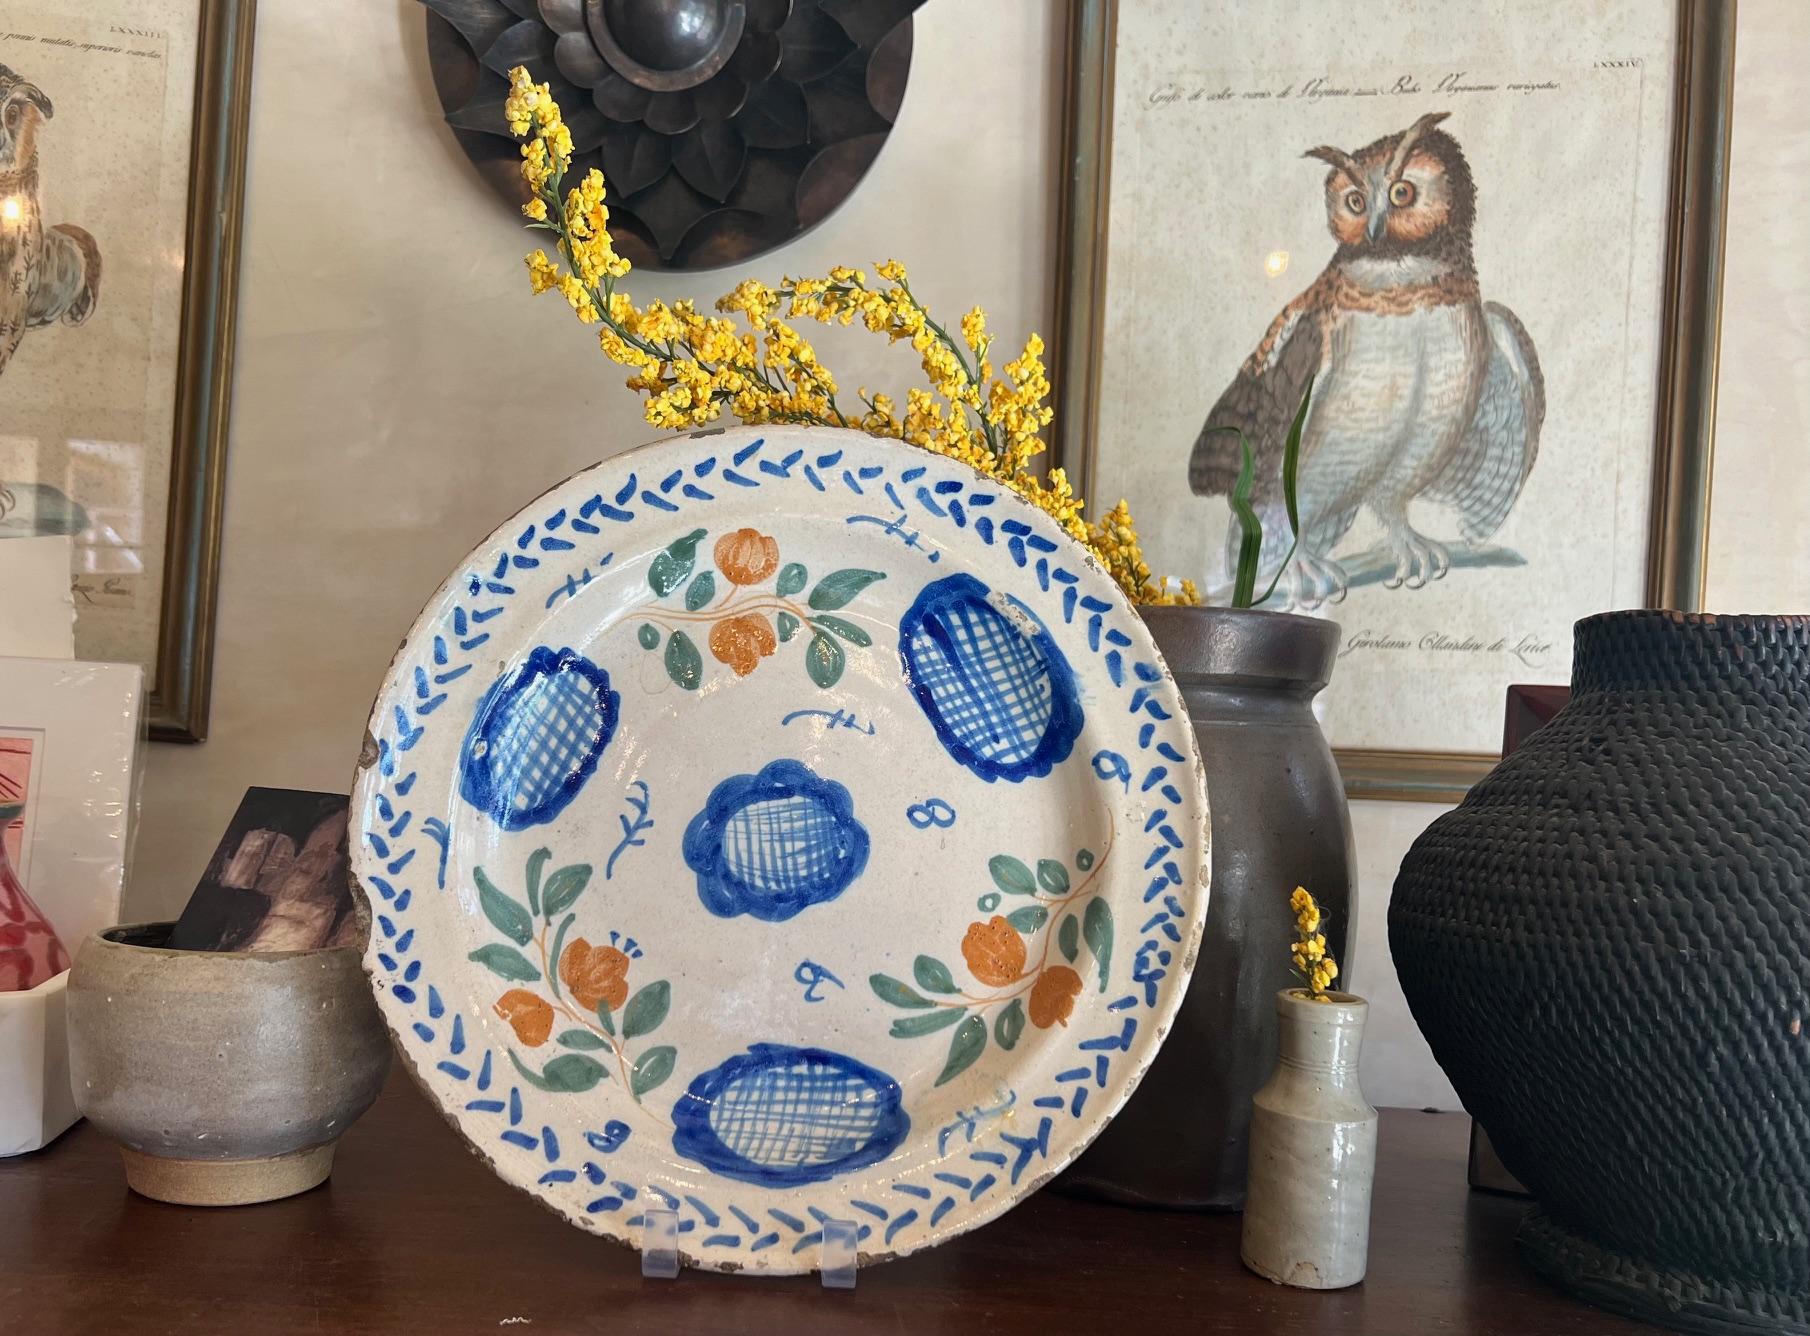 Simply painted European charger / plate / platter from the 18th century, likely Spanish. The tin-glazed, hand painted plate is decorated with blue and orange flowers surrounded by green leaves and blue accents.

I will include a plate hanger so it